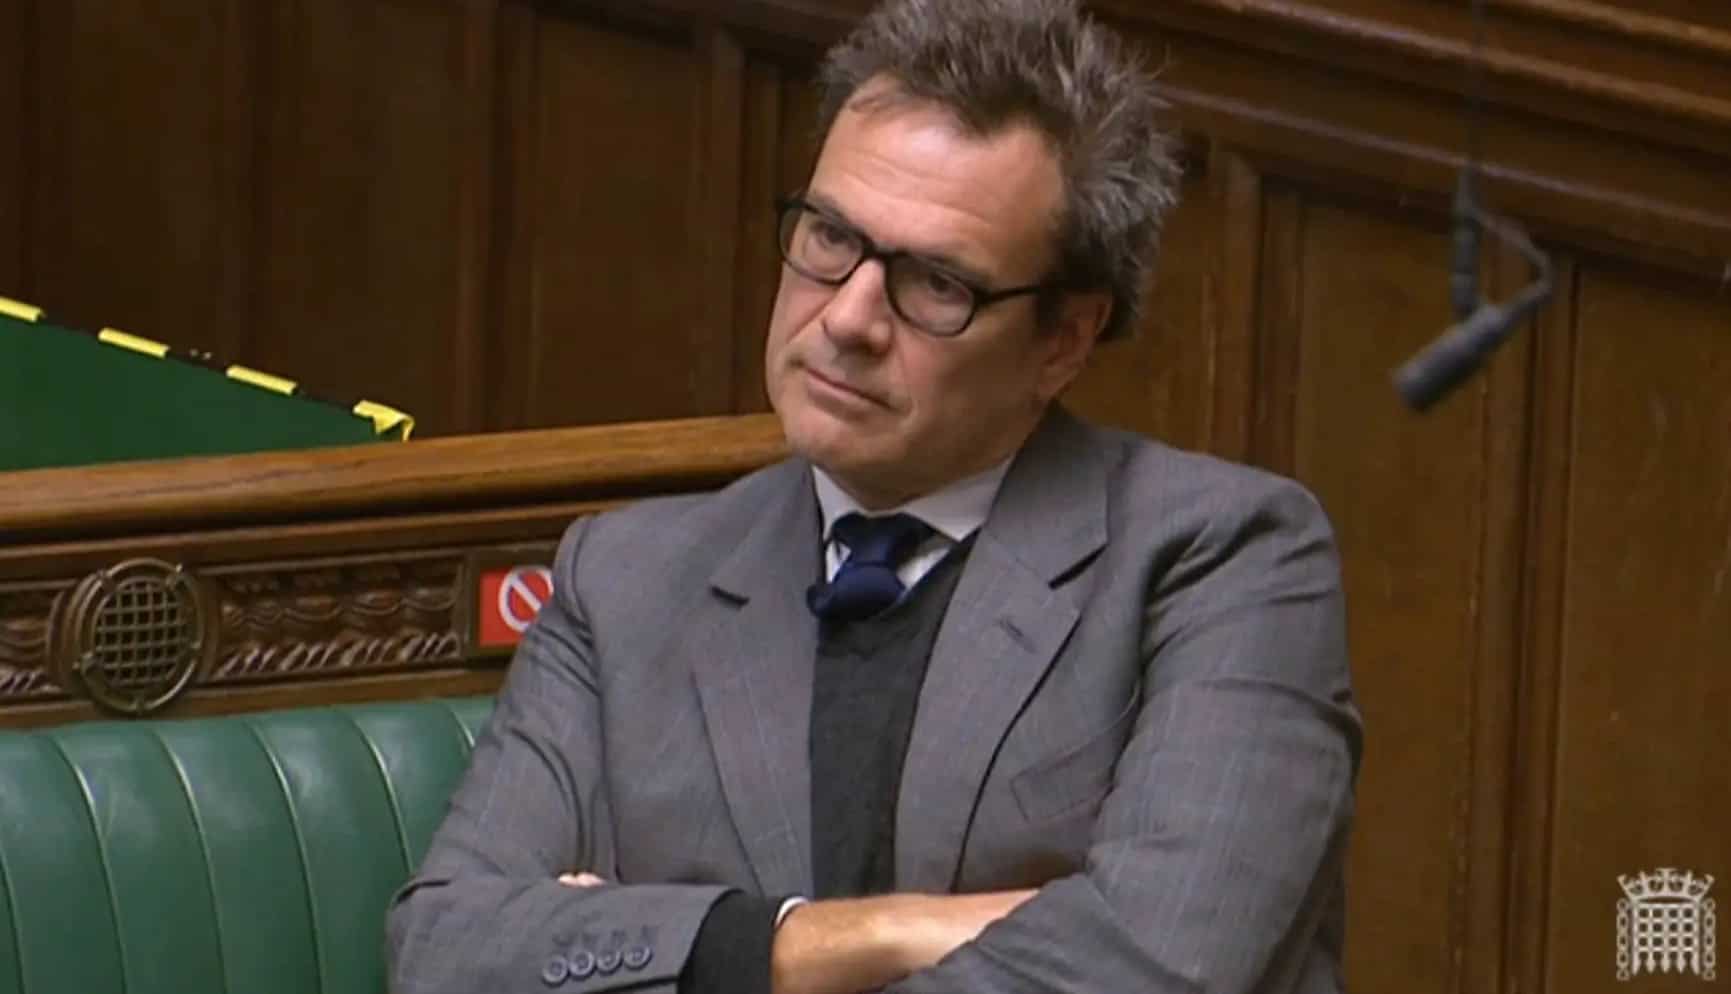 bob seely in parliament with arms crossed